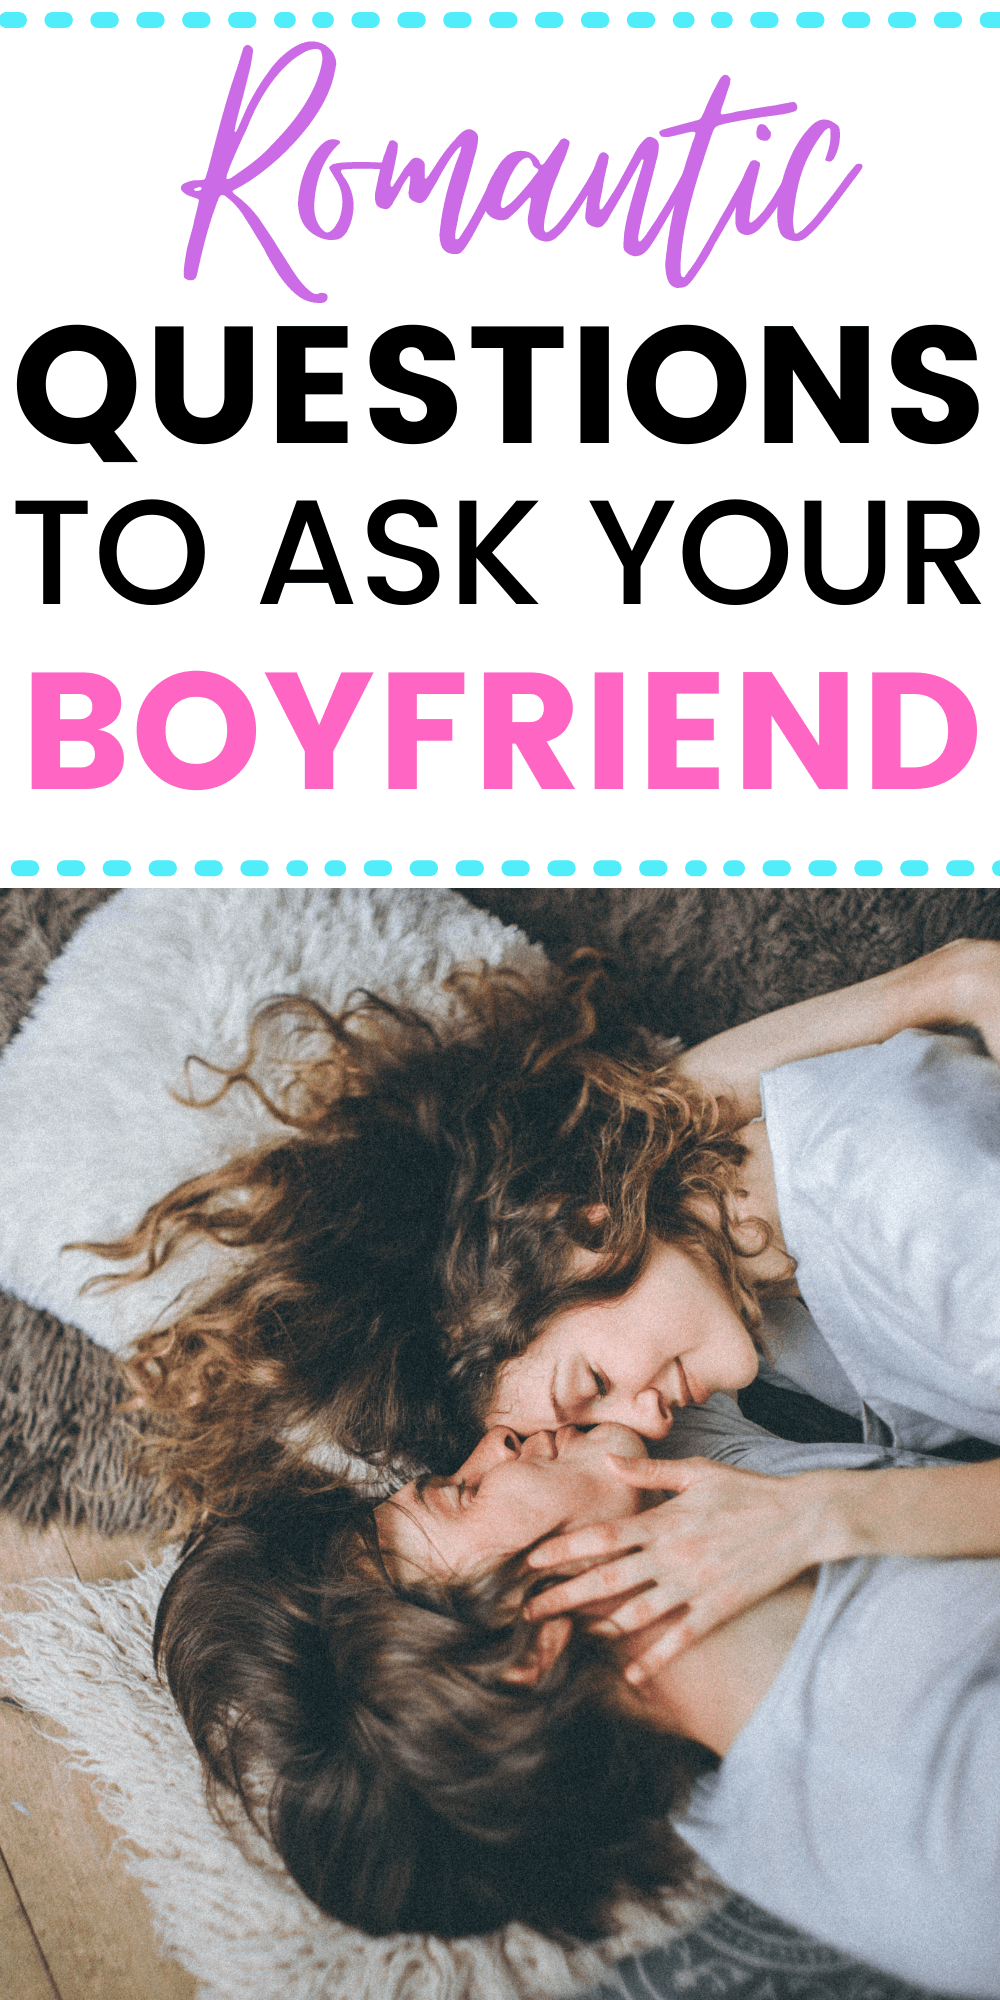 How to Get a Boyfriend 11 Ways to Attract the Right Guy